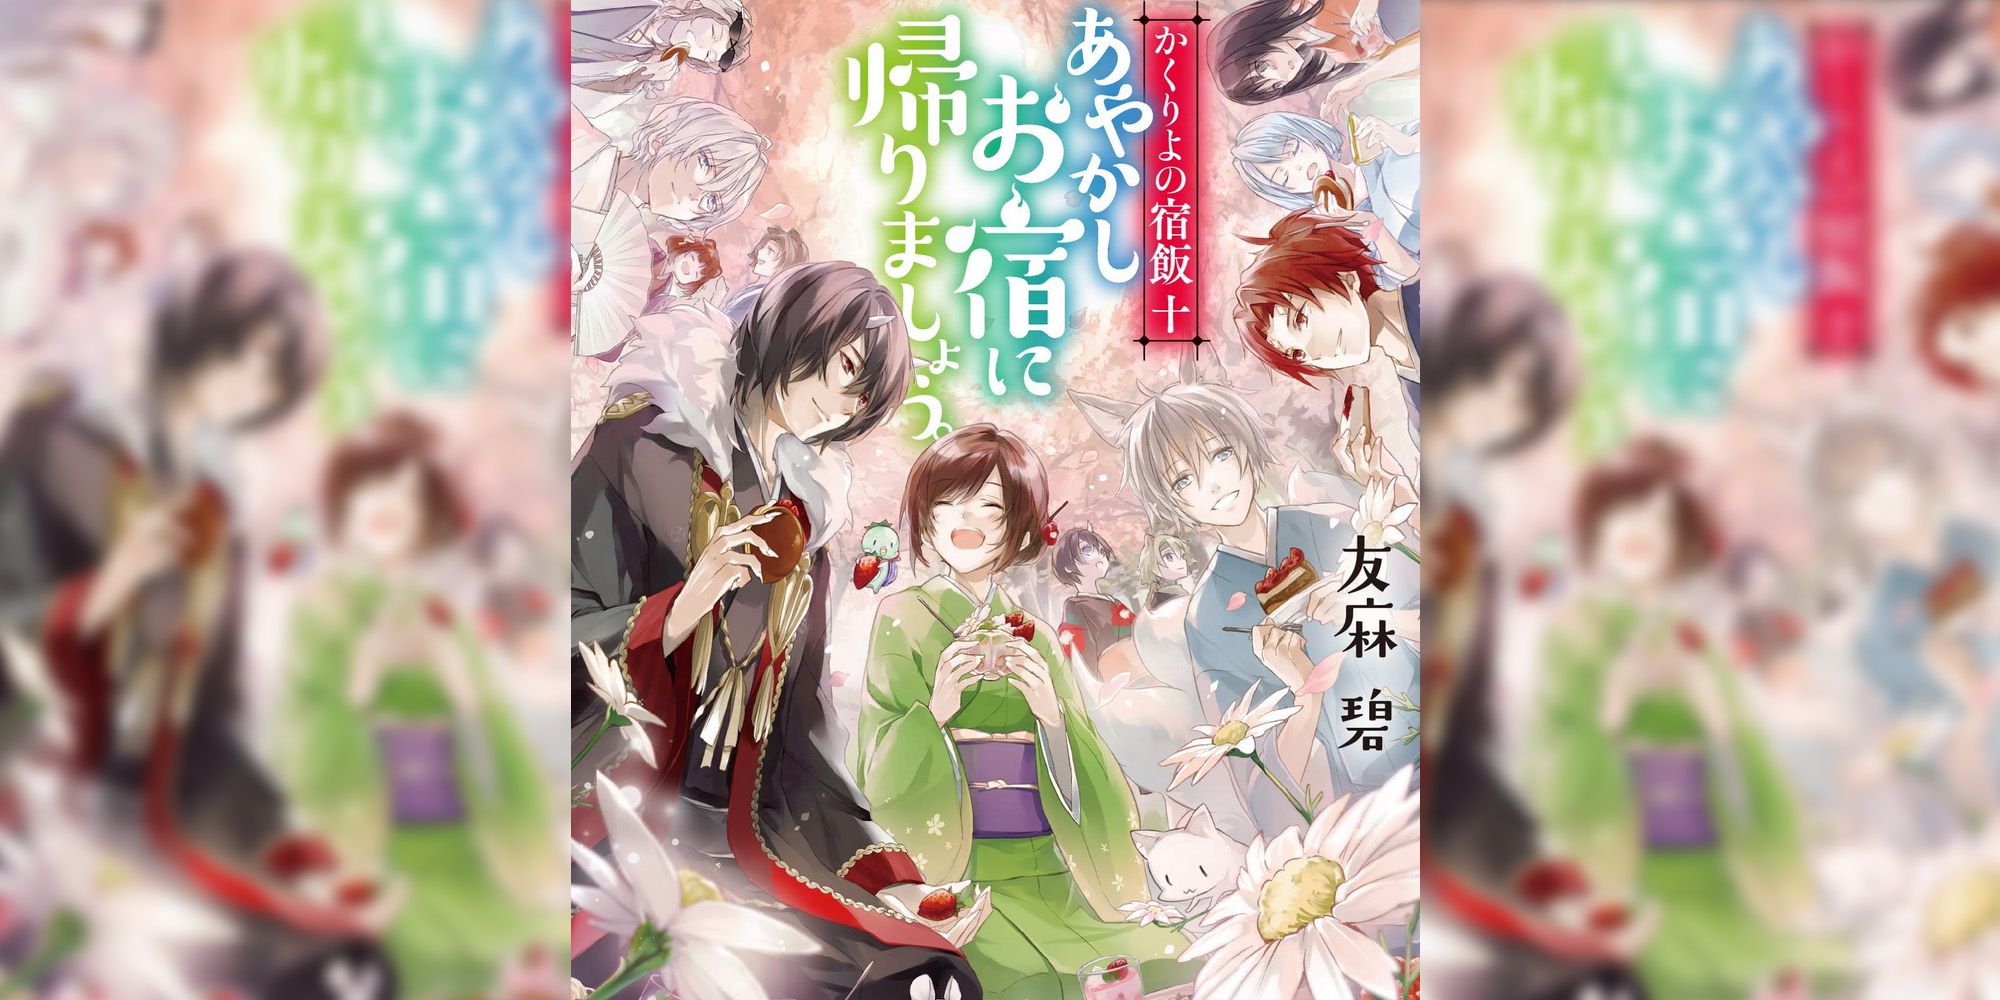 Kakuriyo Bed and Breakfast for Spirits volume 10 cover all male leads